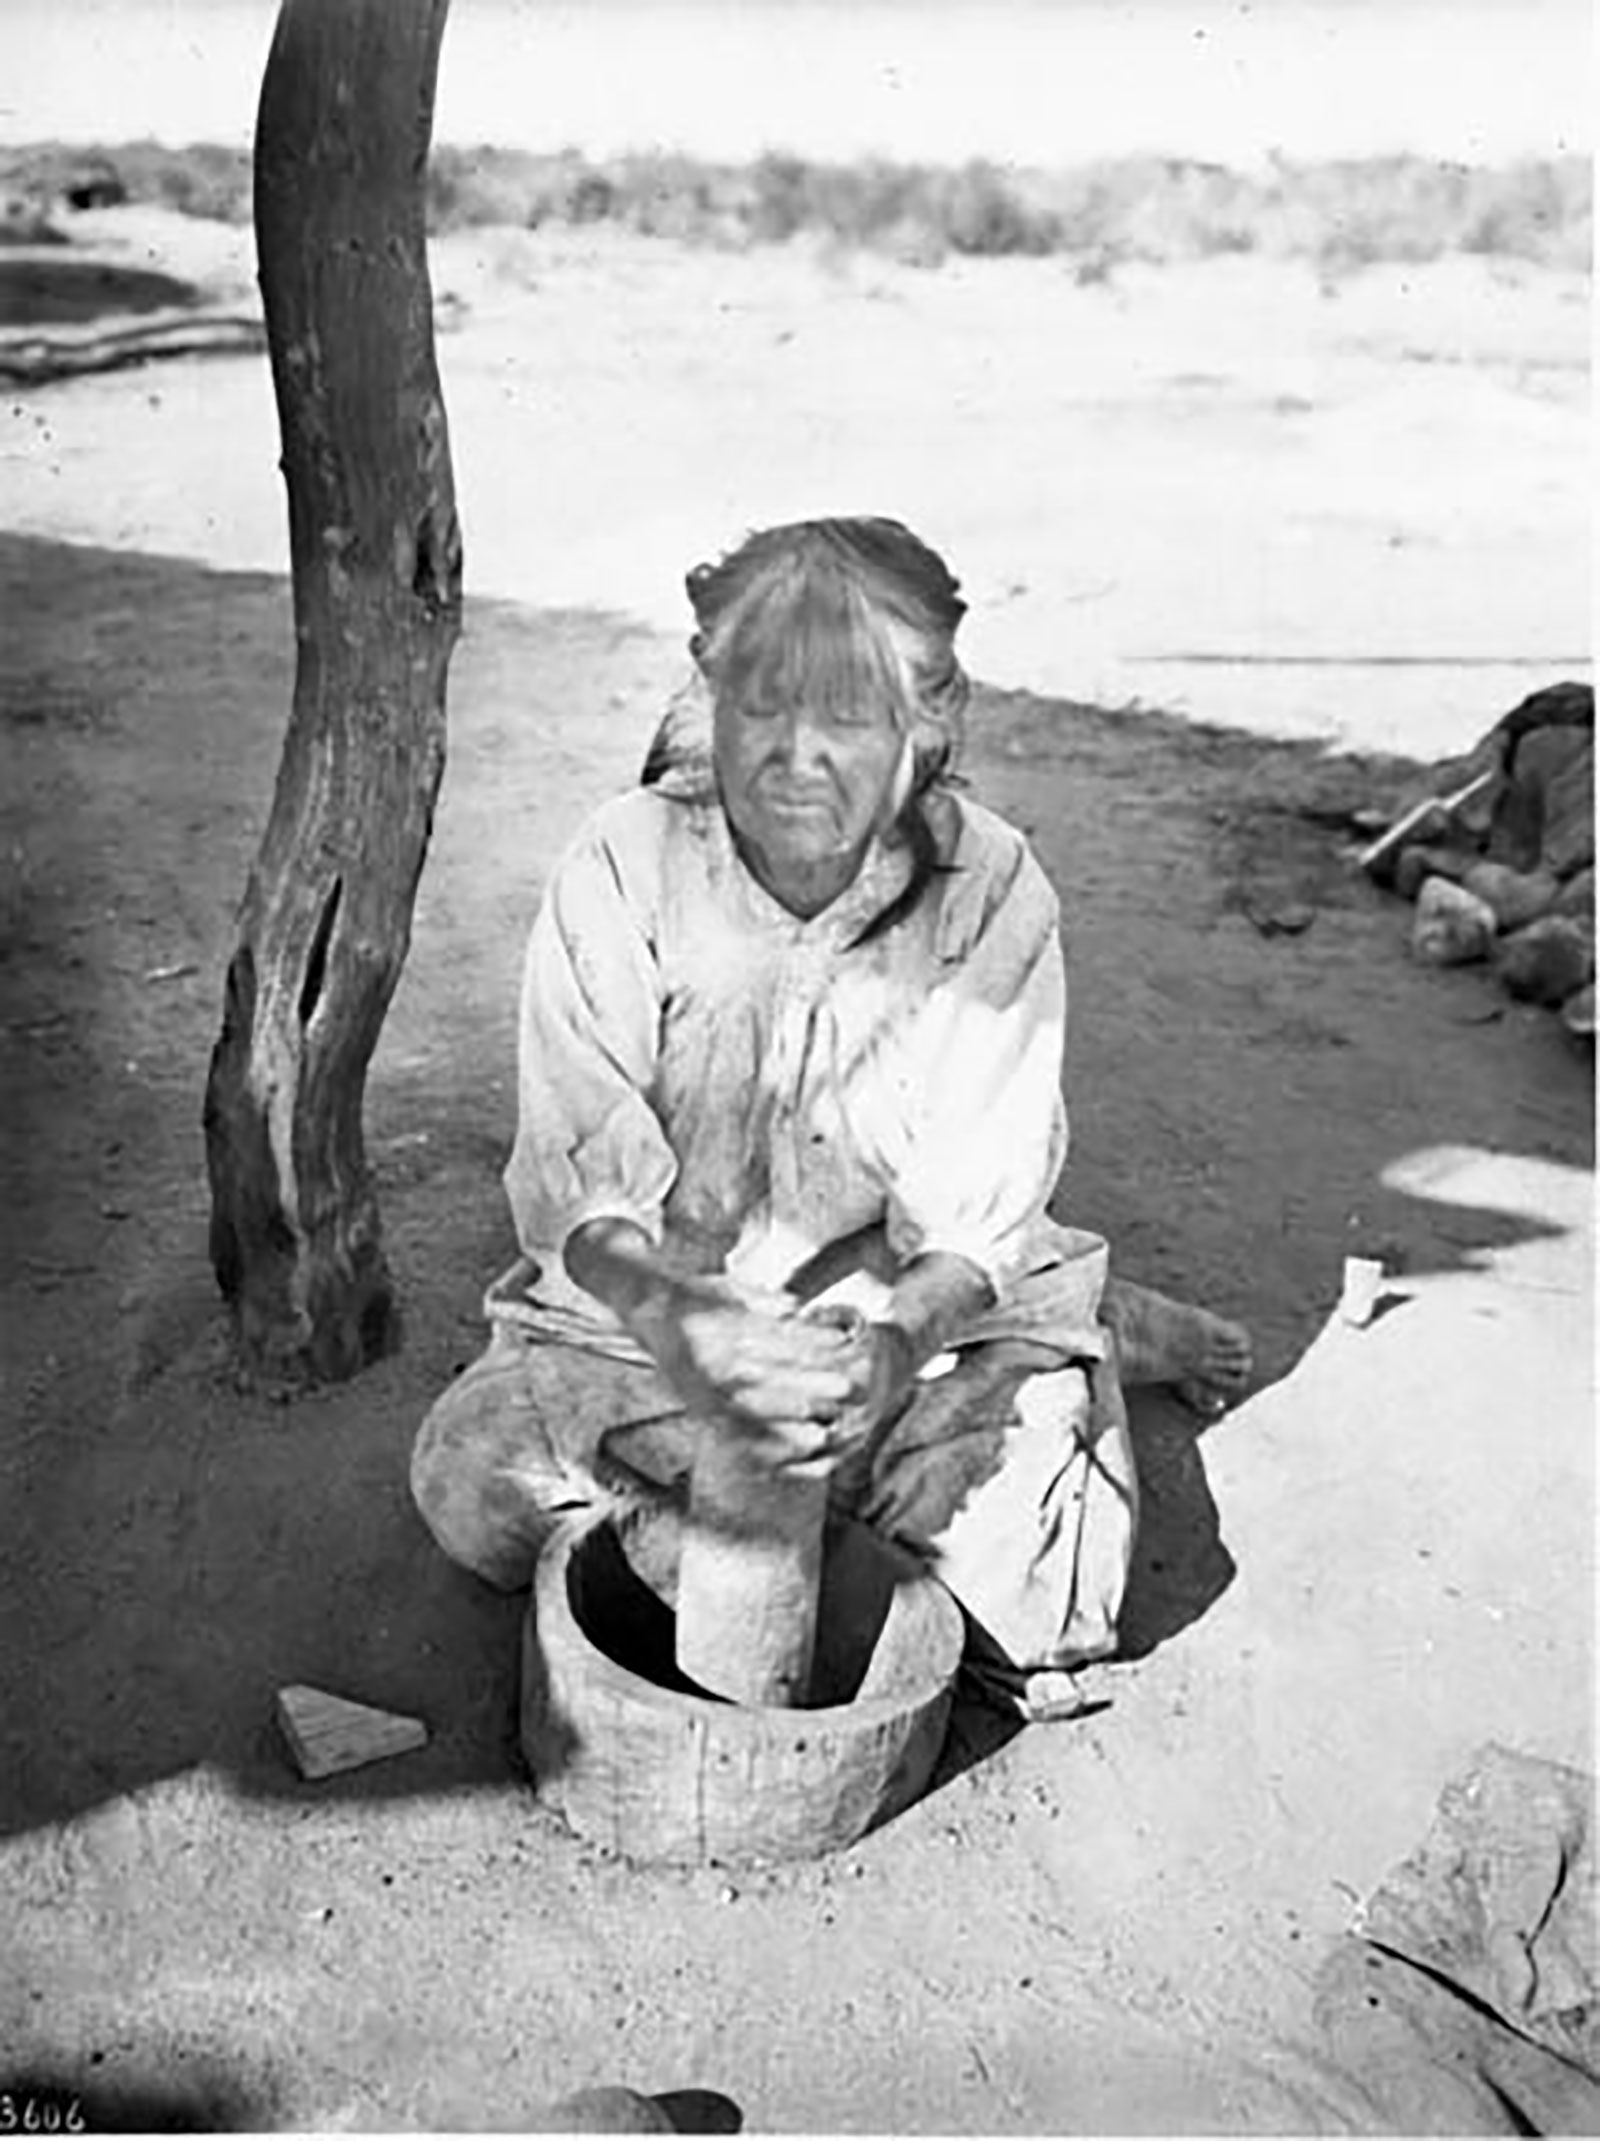 Pima Indian woman, Si-Rup, pounding mesquite beans in a wooden mortar